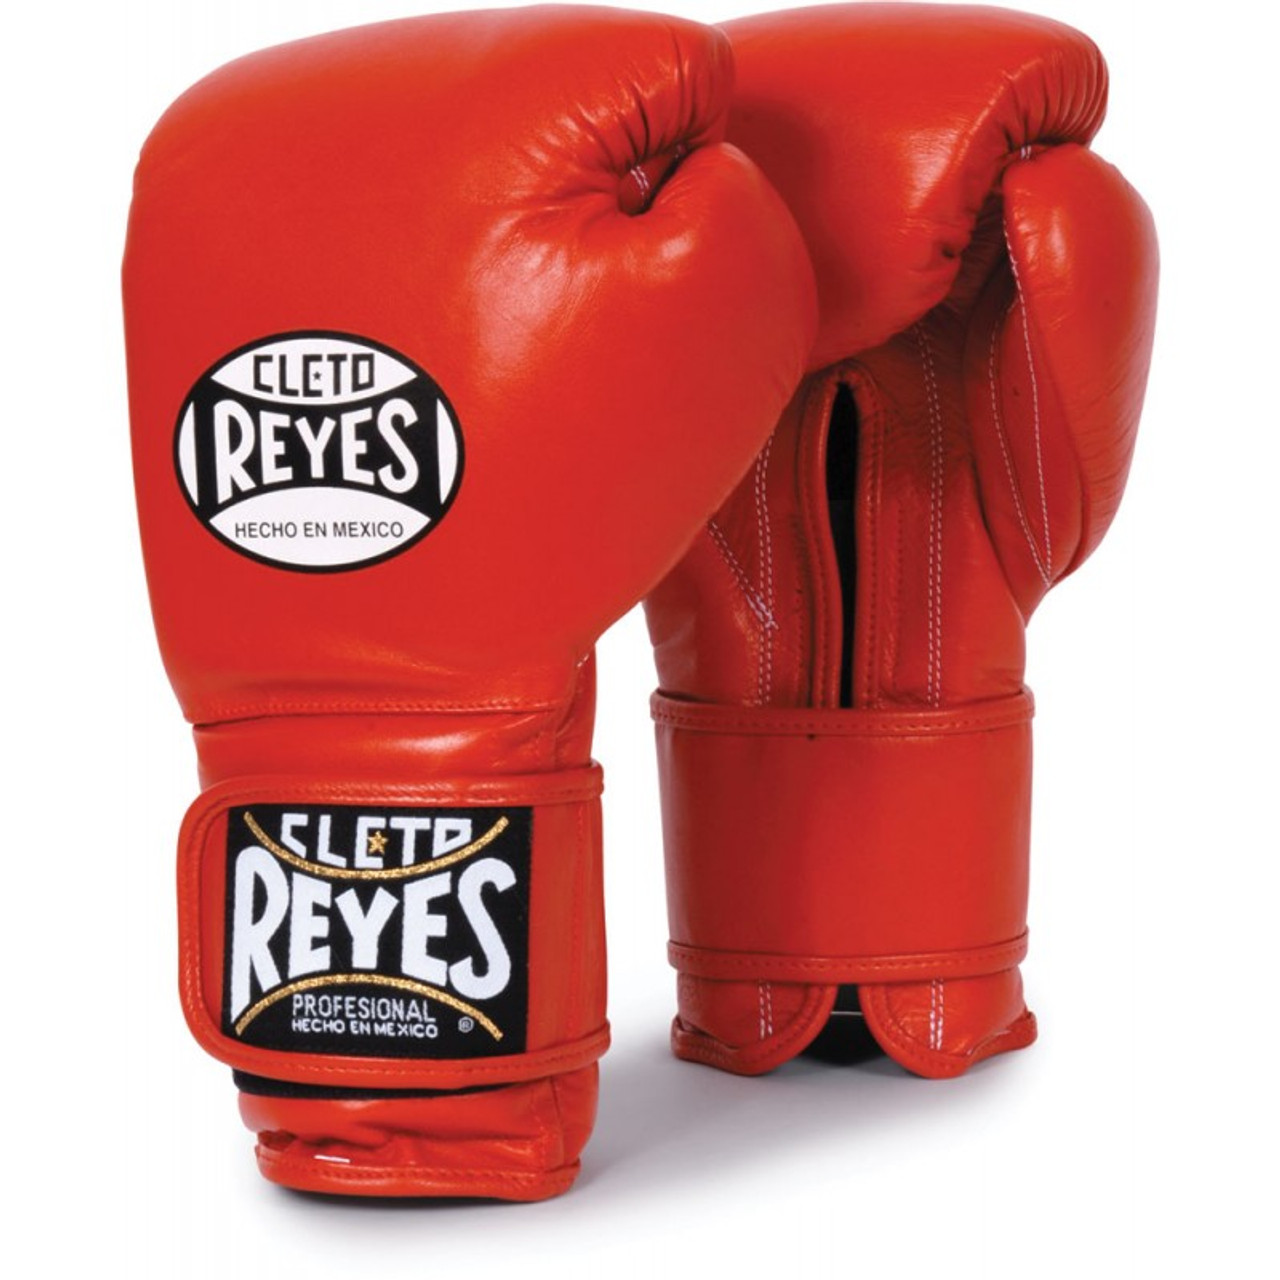 Cleto Reyes Hook and Loop Leather Training Boxing Gloves - Red